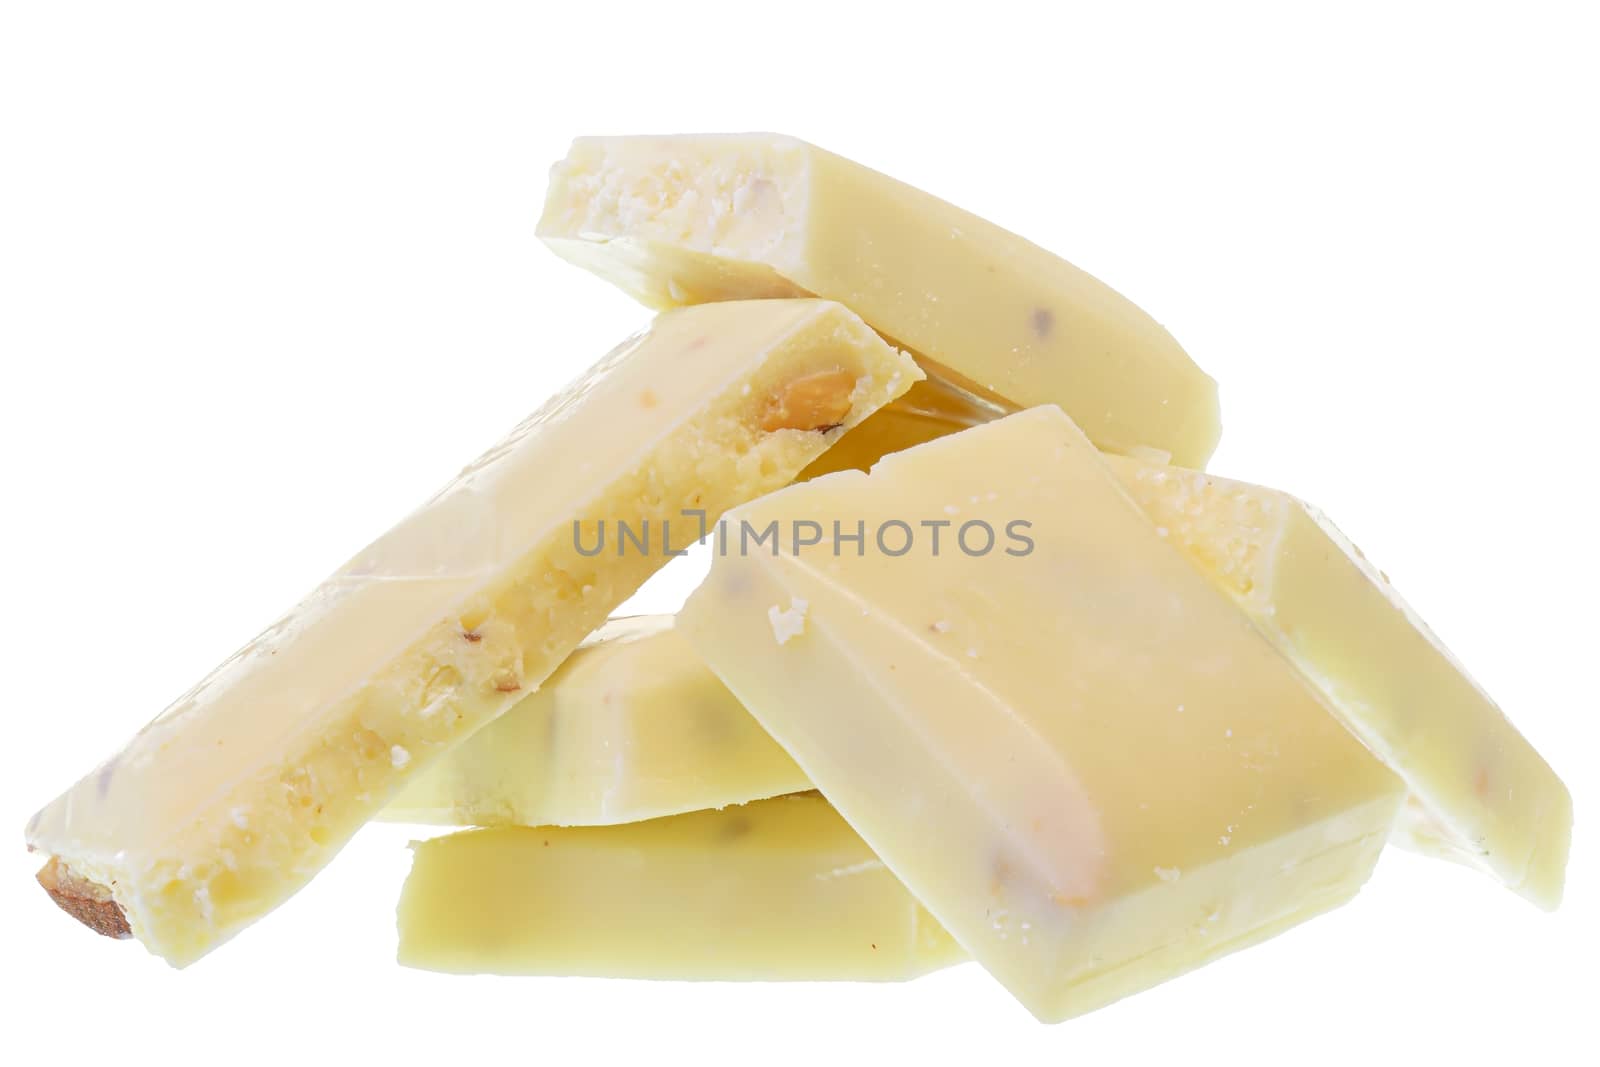 Broken white chocolate with whole almond nuts Isolated on a white background.